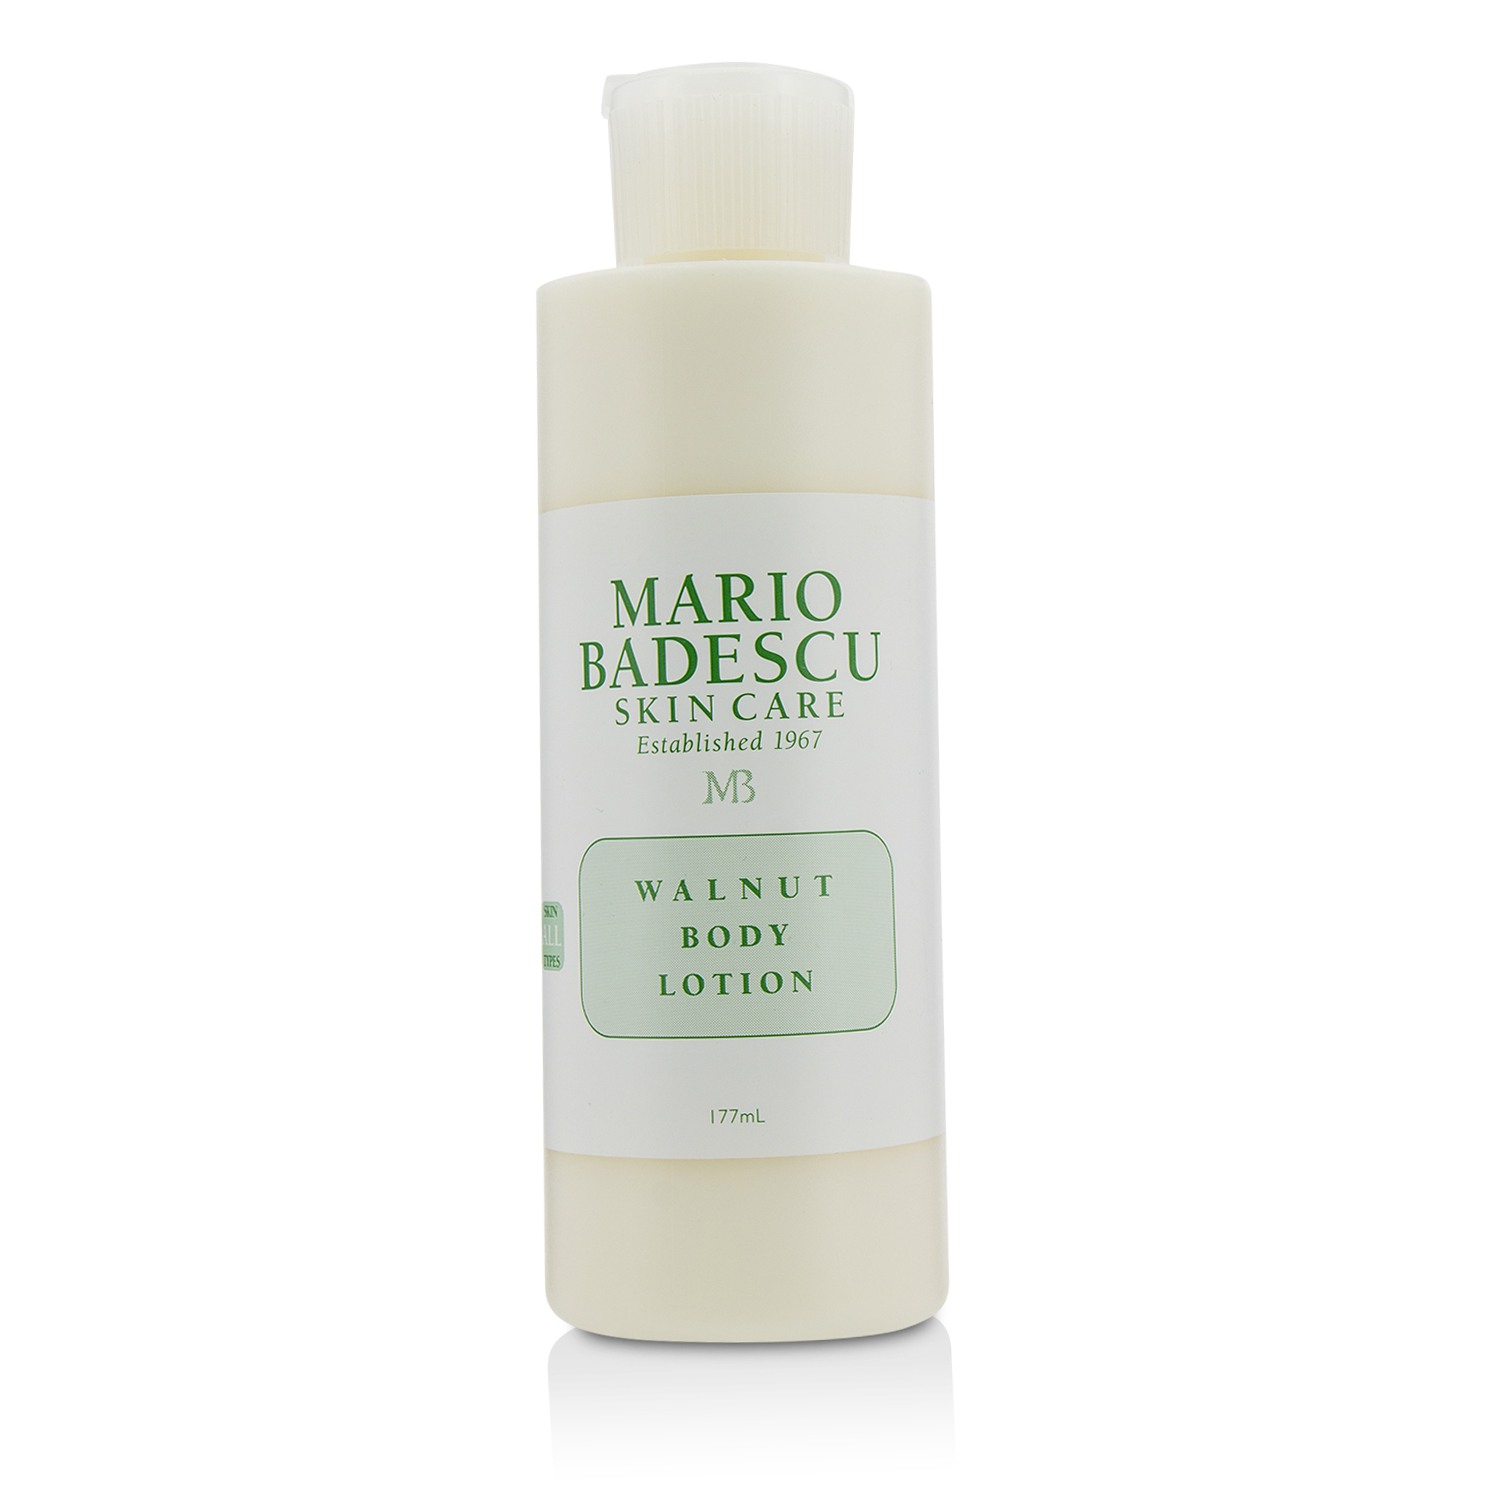 Walnut Body Lotion - For All Skin Types Mario Badescu Image